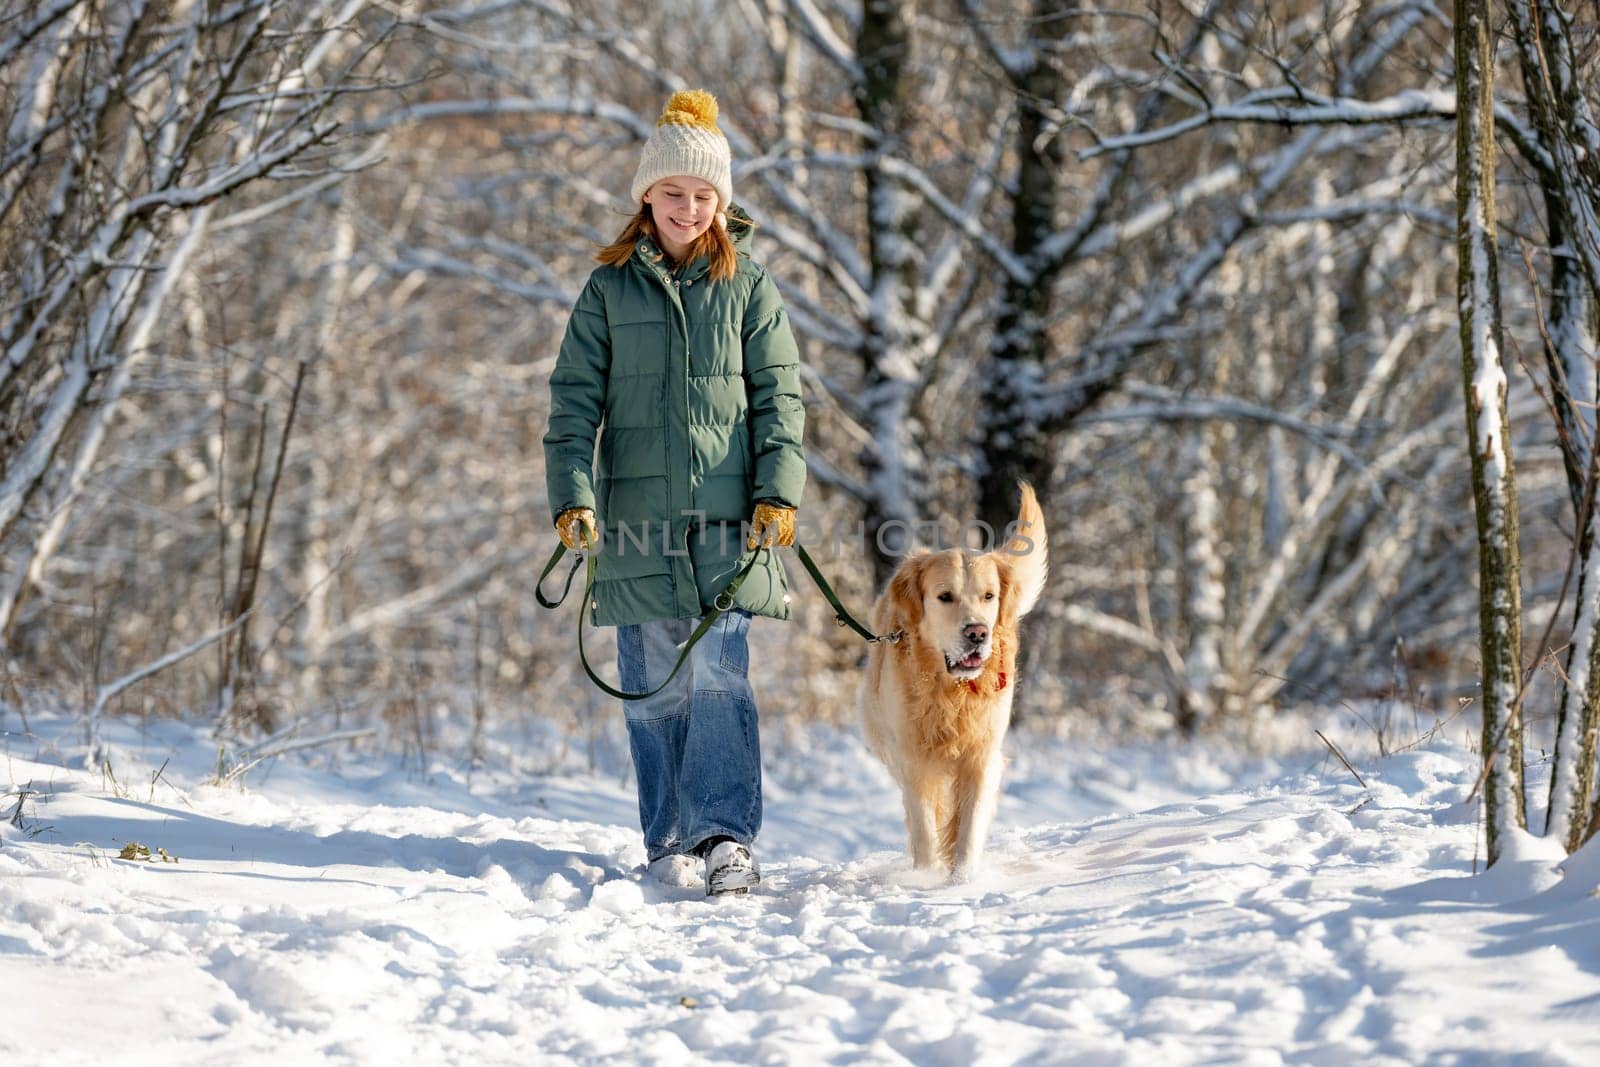 Girl Walks With Golden Retriever In Winter Forest, Strolling With Dog Through Snow-Covered Woods